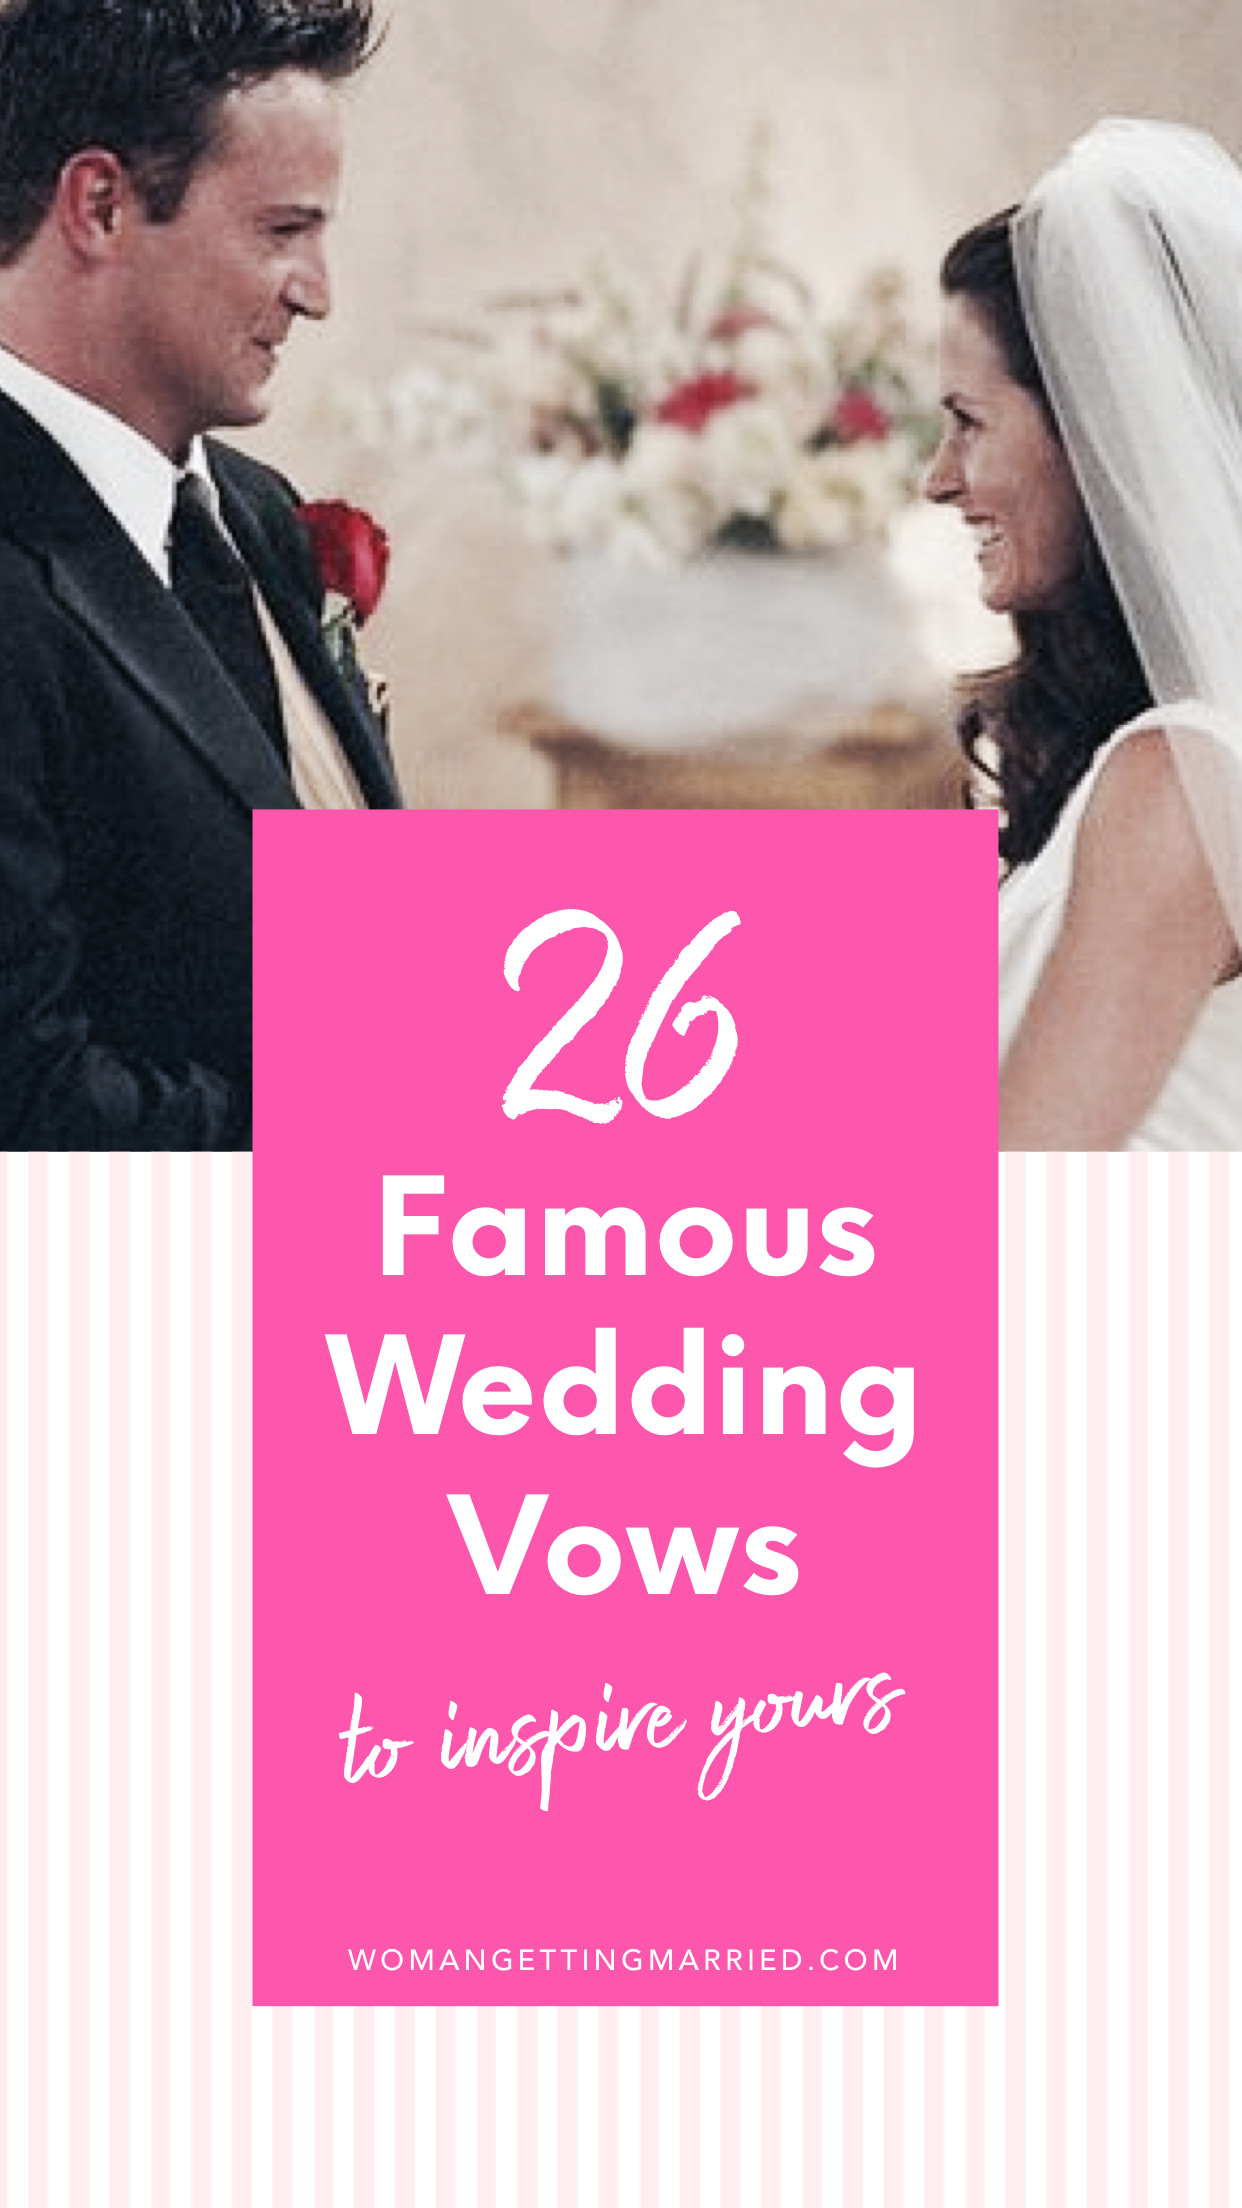 Weddings Vows
 26 Famous Wedding Vows to Inspire Your Own